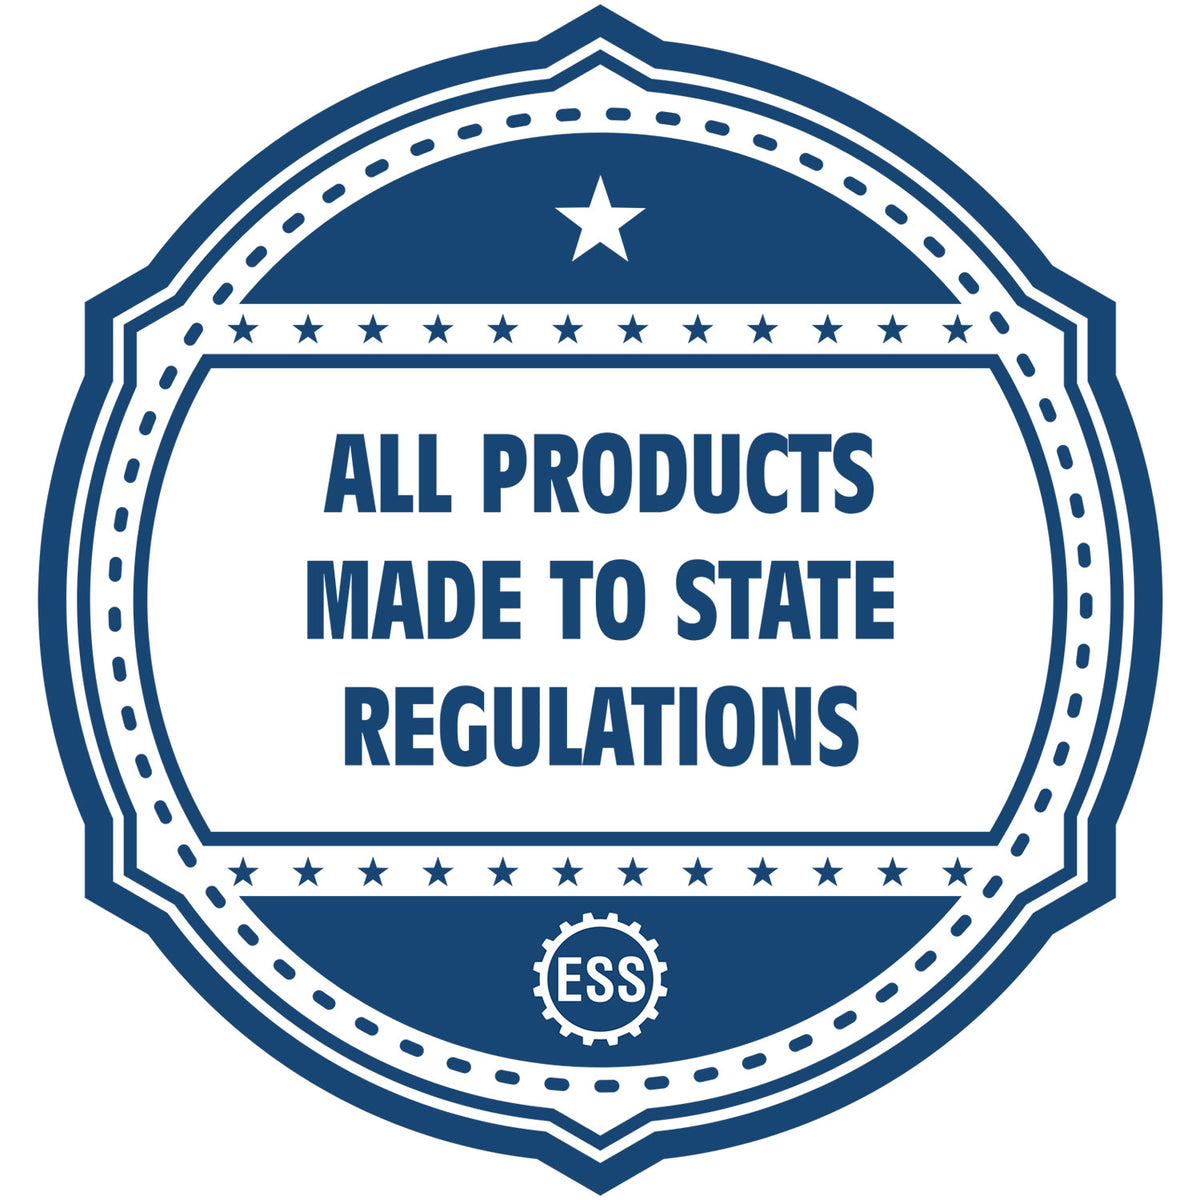 An icon or badge element for the Texas Landscape Architectural Seal Stamp showing that this product is made in compliance with state regulations.